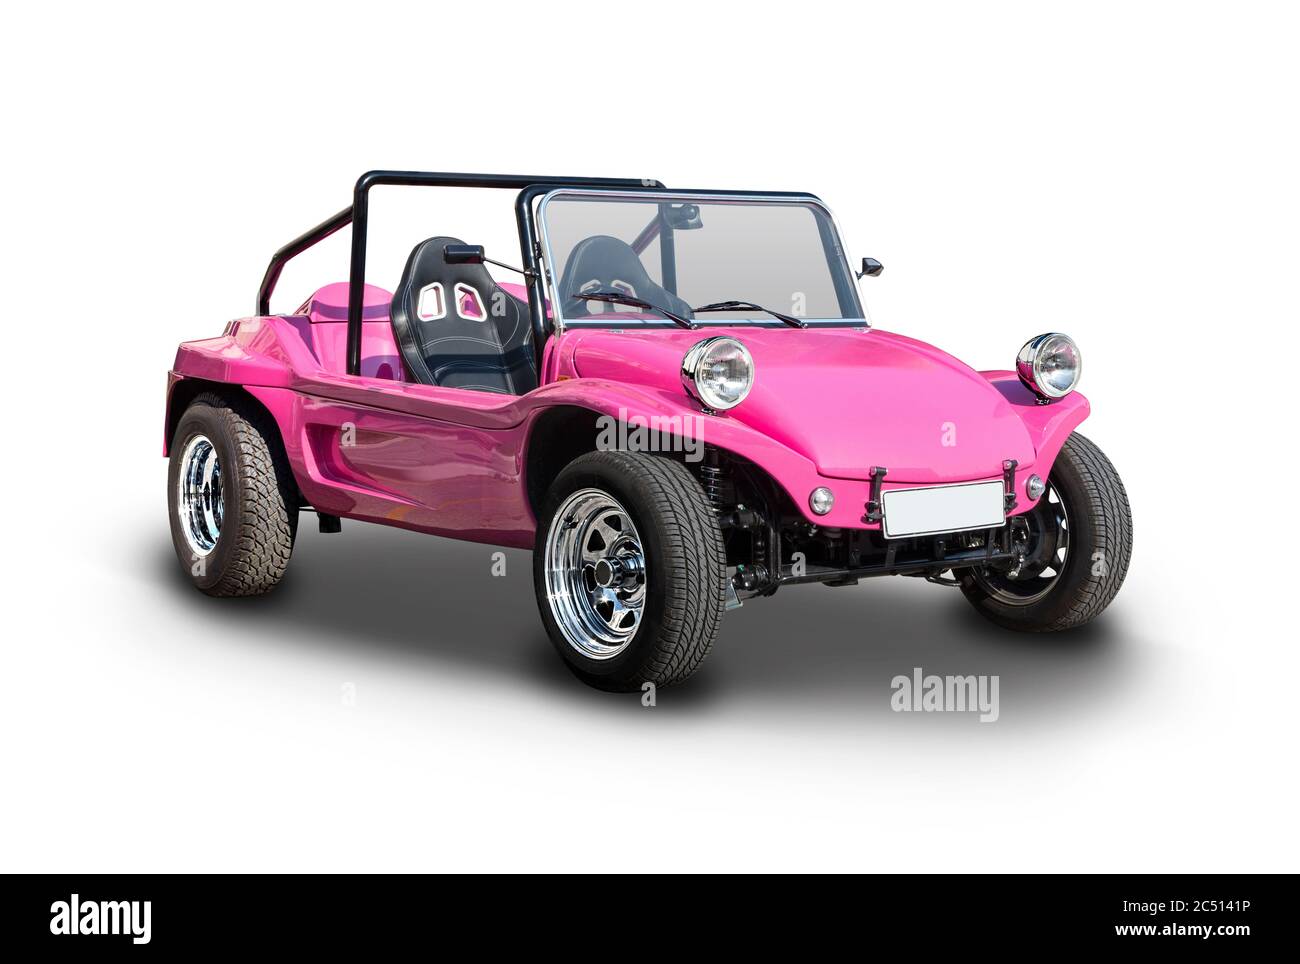 Pink Dune buggy side view isolated on white Stock Photo